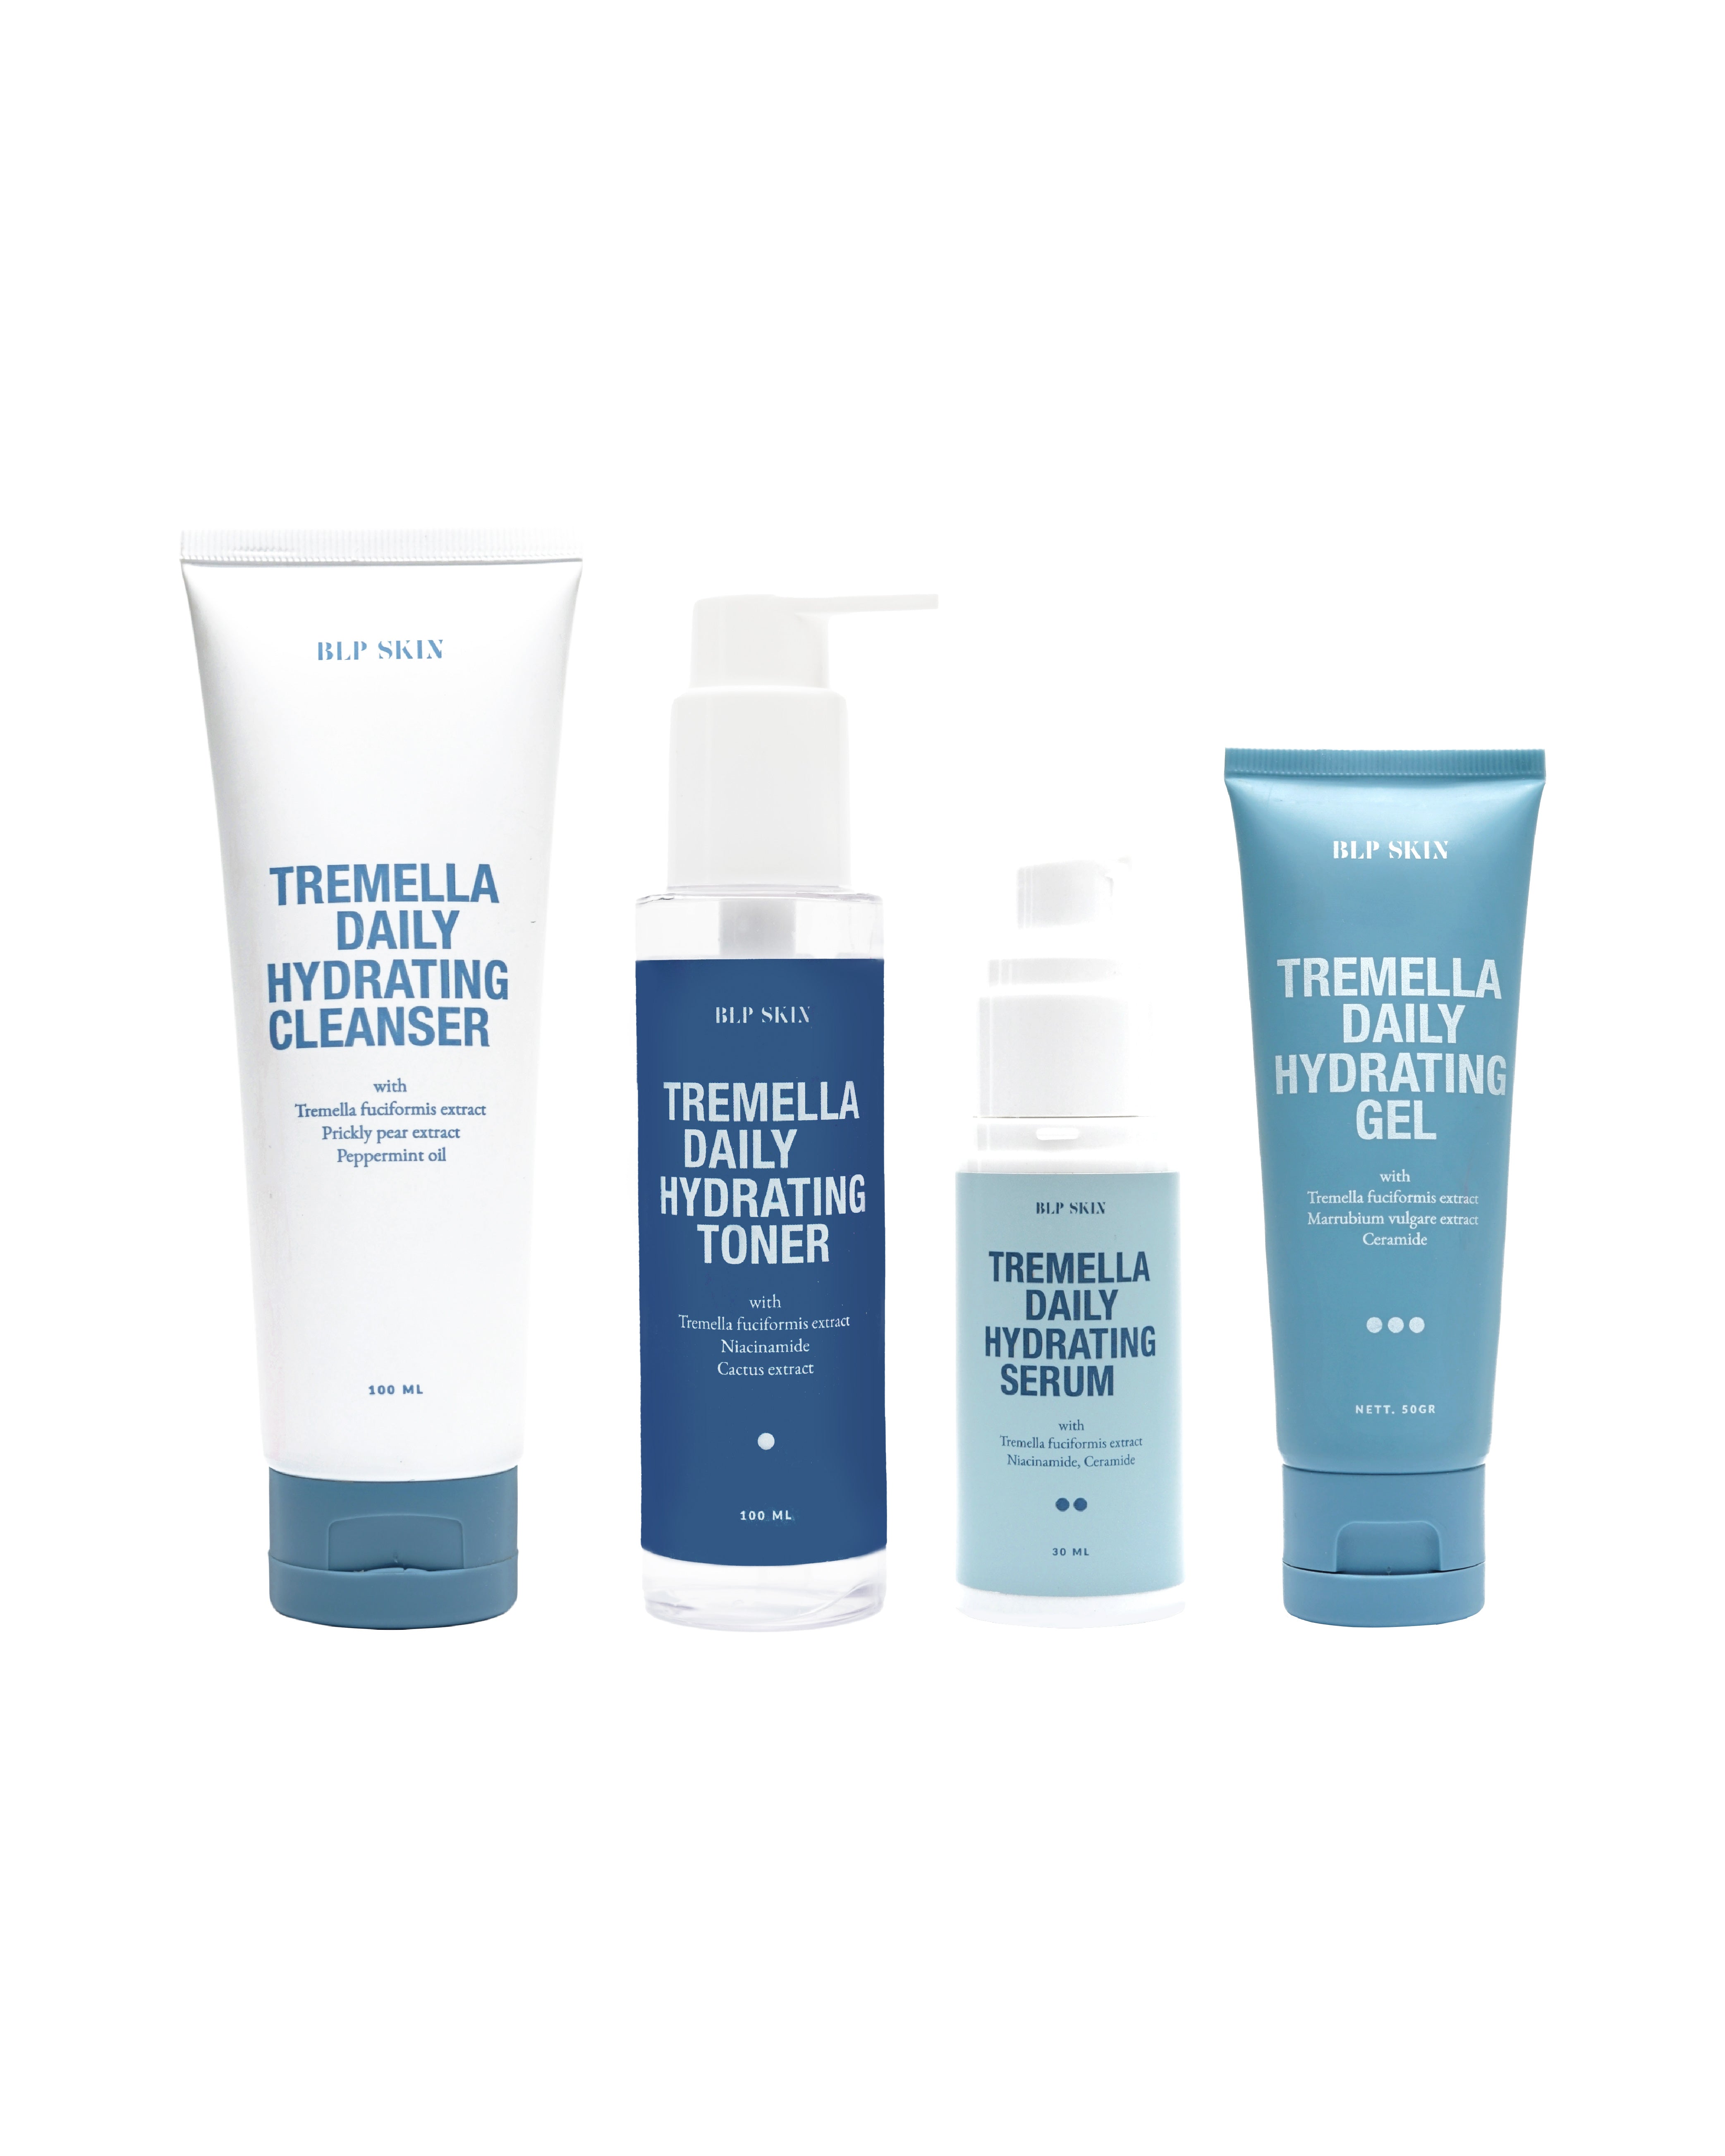 TREMELLA DAILY HYDRATING SERIES COMPLETE SET